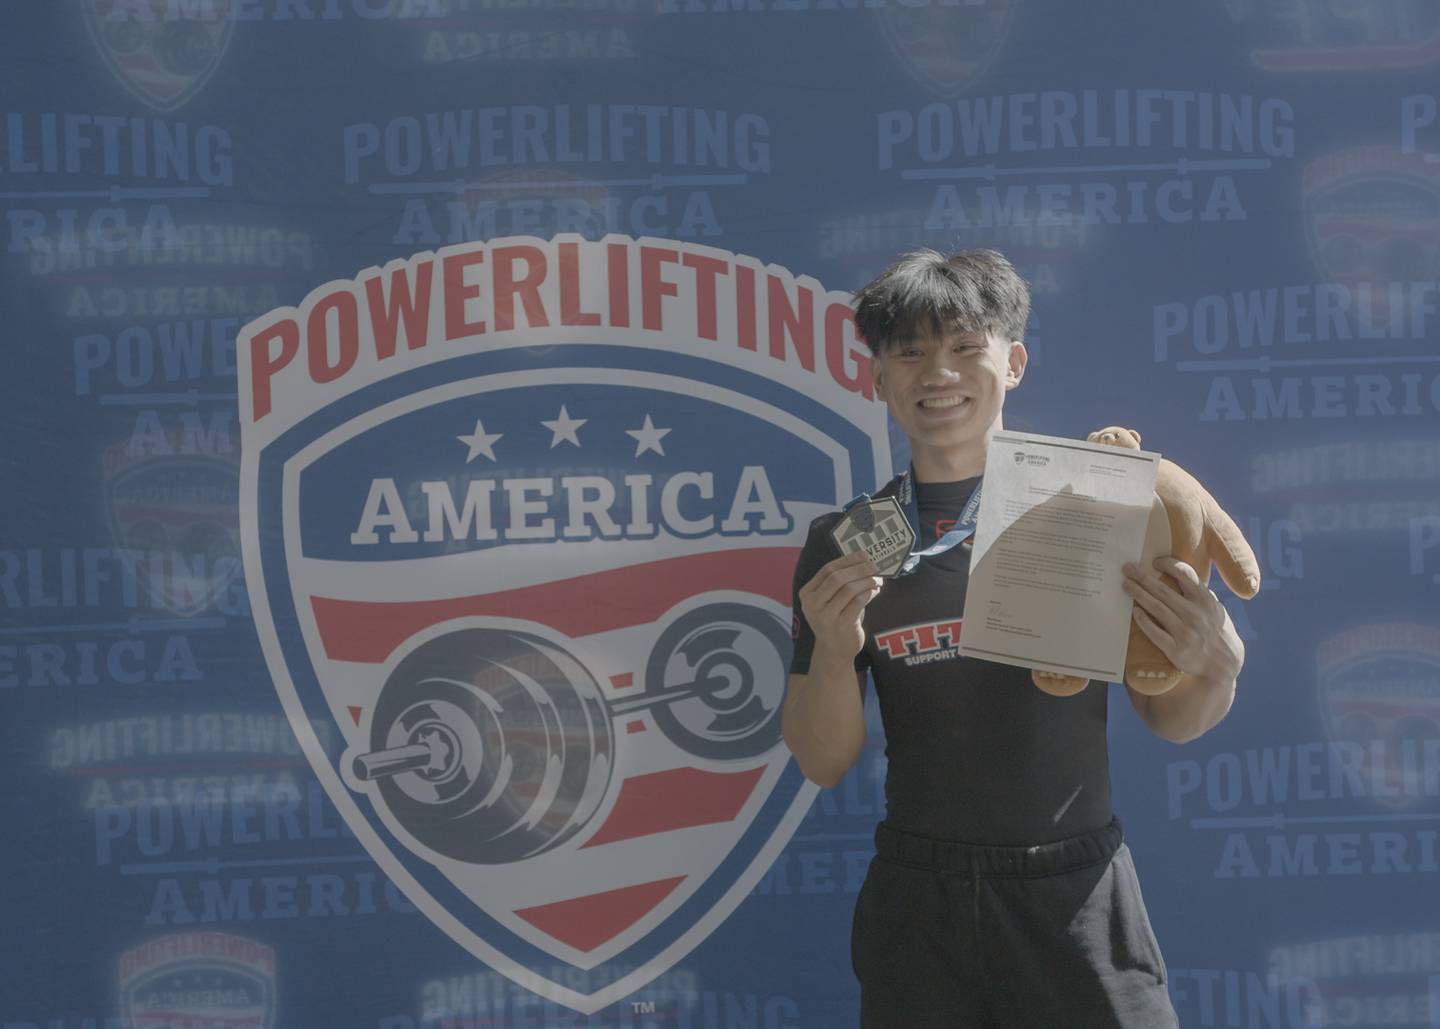 Andy Cabindol holding his 2nd place medal and official invite to Team USA.